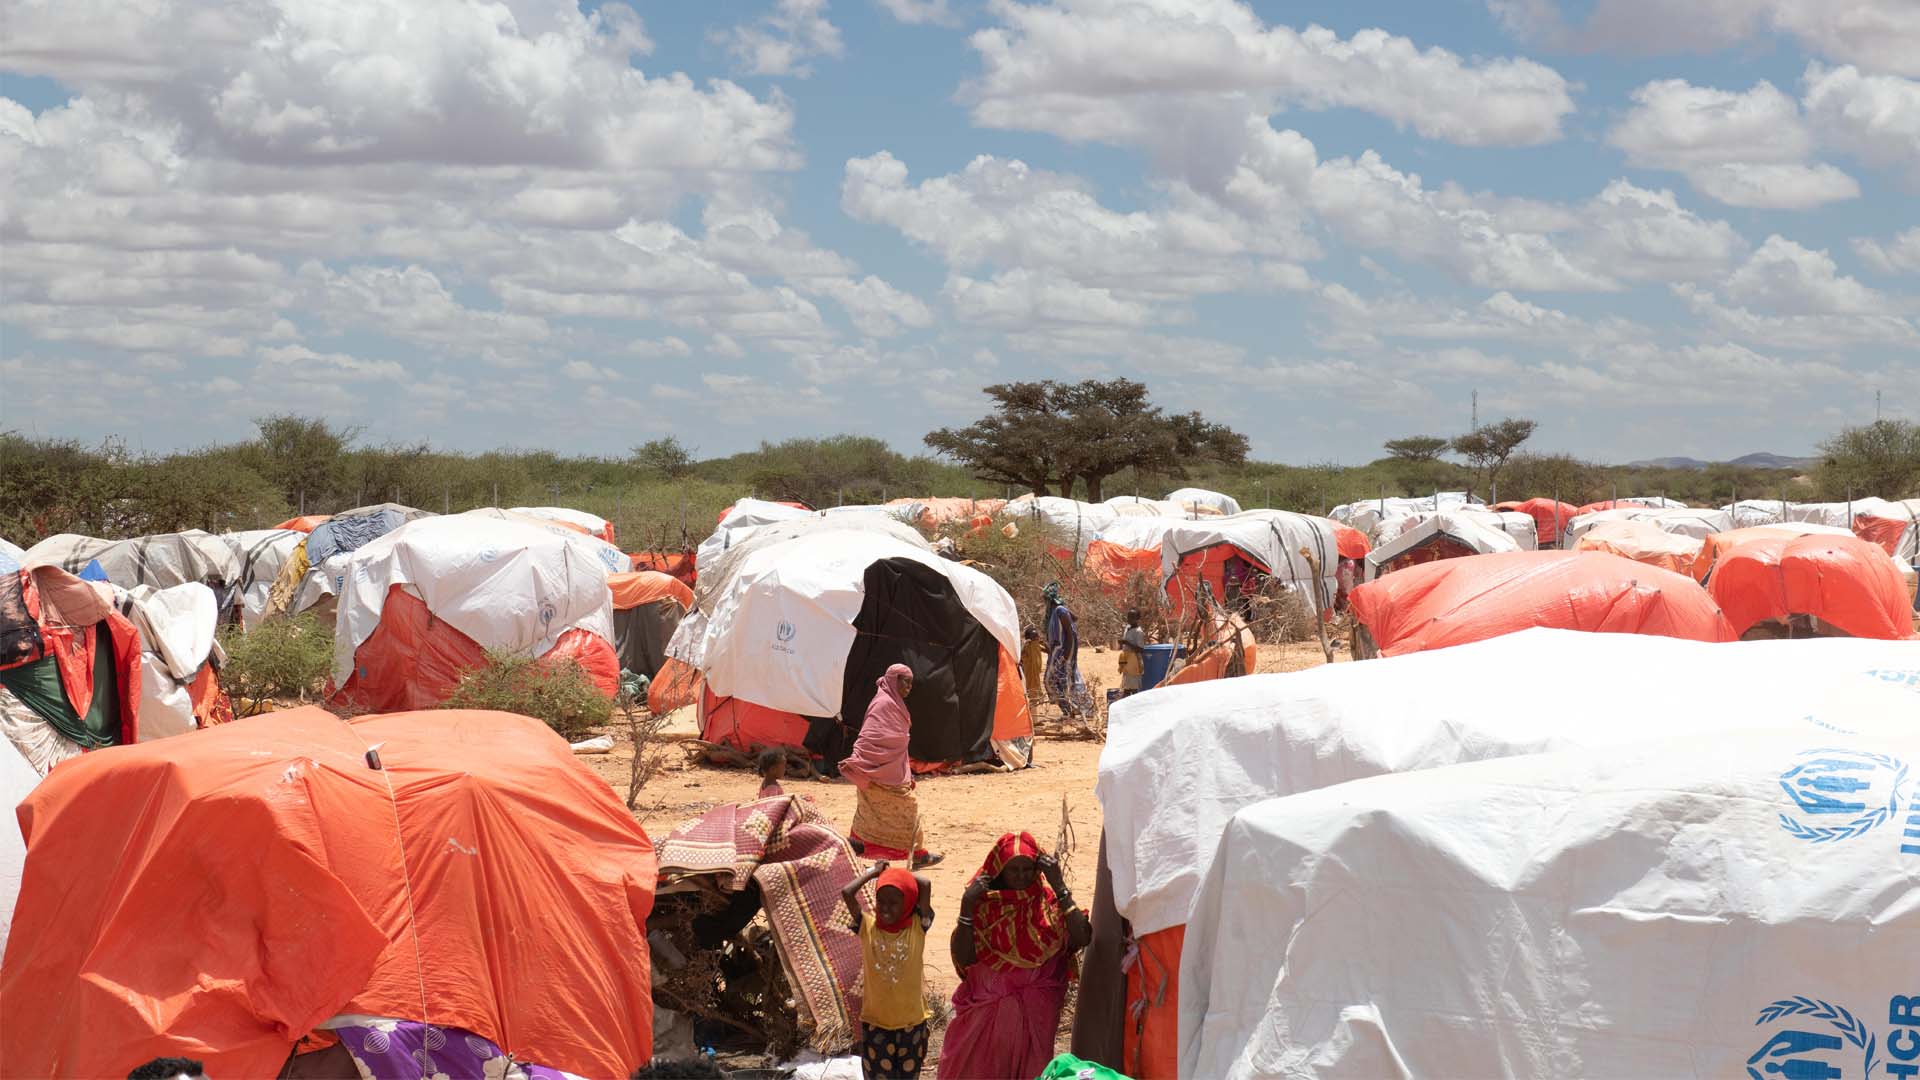 A woman is pictured at a distance walking in between encampments. These are temporary tent shelters in an informal refugee camps outside Kalabaydh, Somalia.